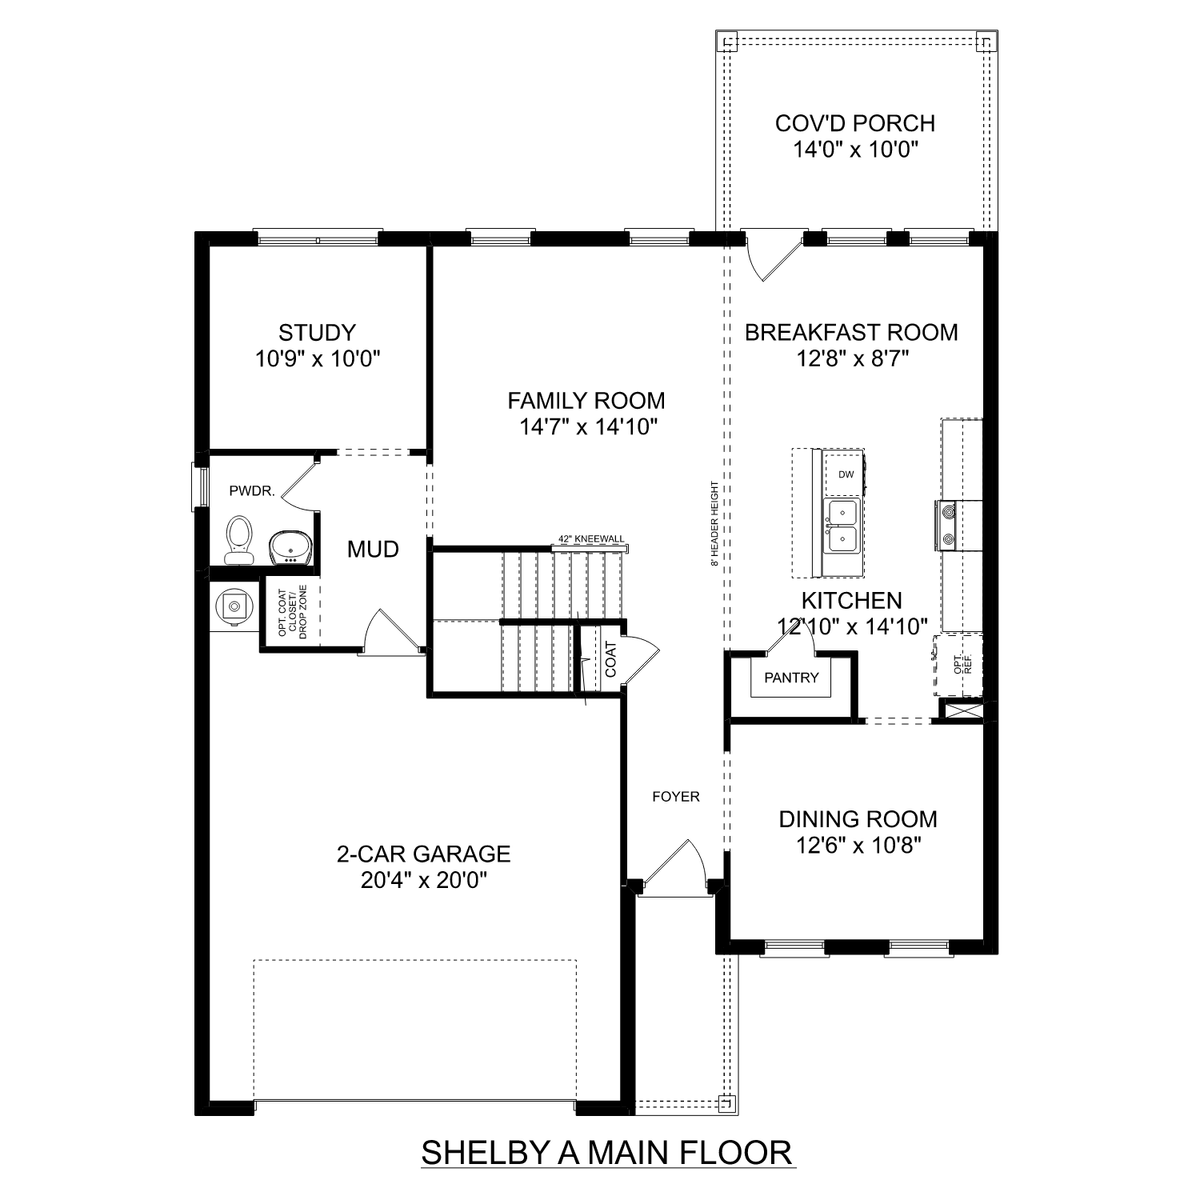 1 - The Shelby A buildable floor plan layout in Davidson Homes' Watts Glen community.